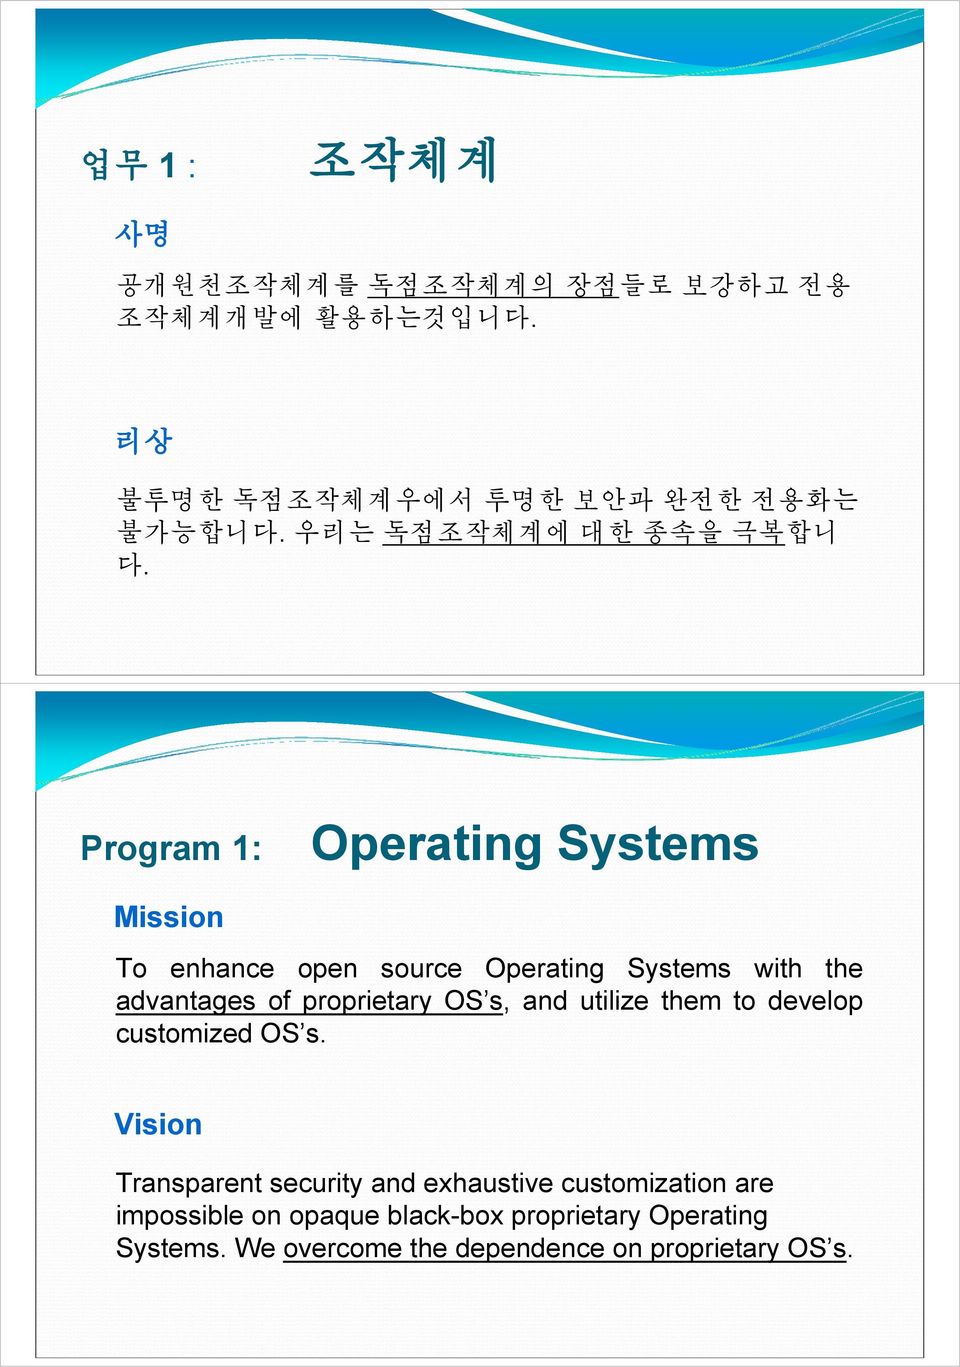 Program 1: Operating Systems Mission To enhance open source Operating Systems with the advantages of proprietary OS